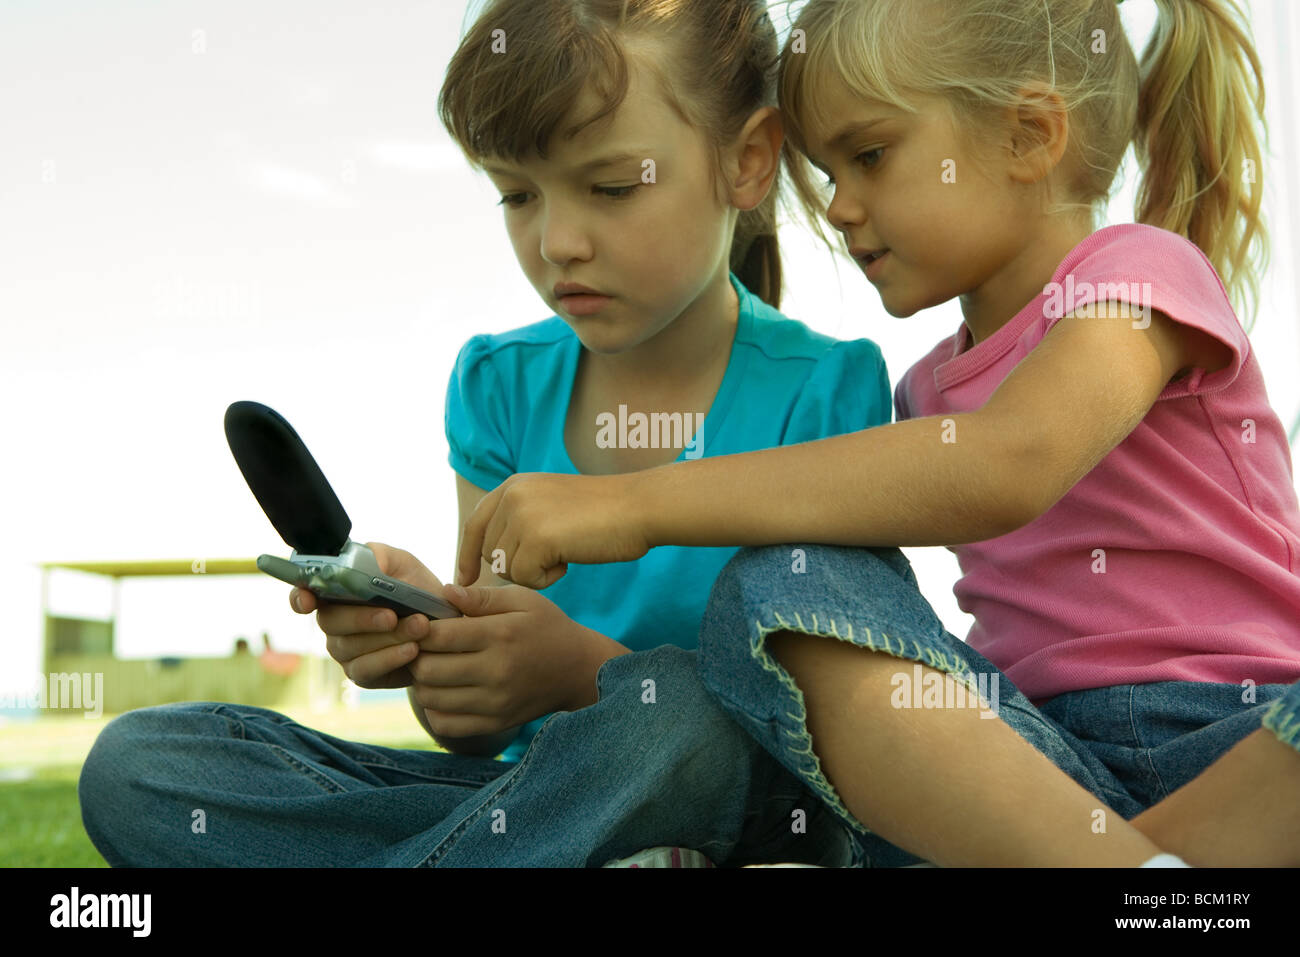 Girls using cell phone together, low angle view Stock Photo